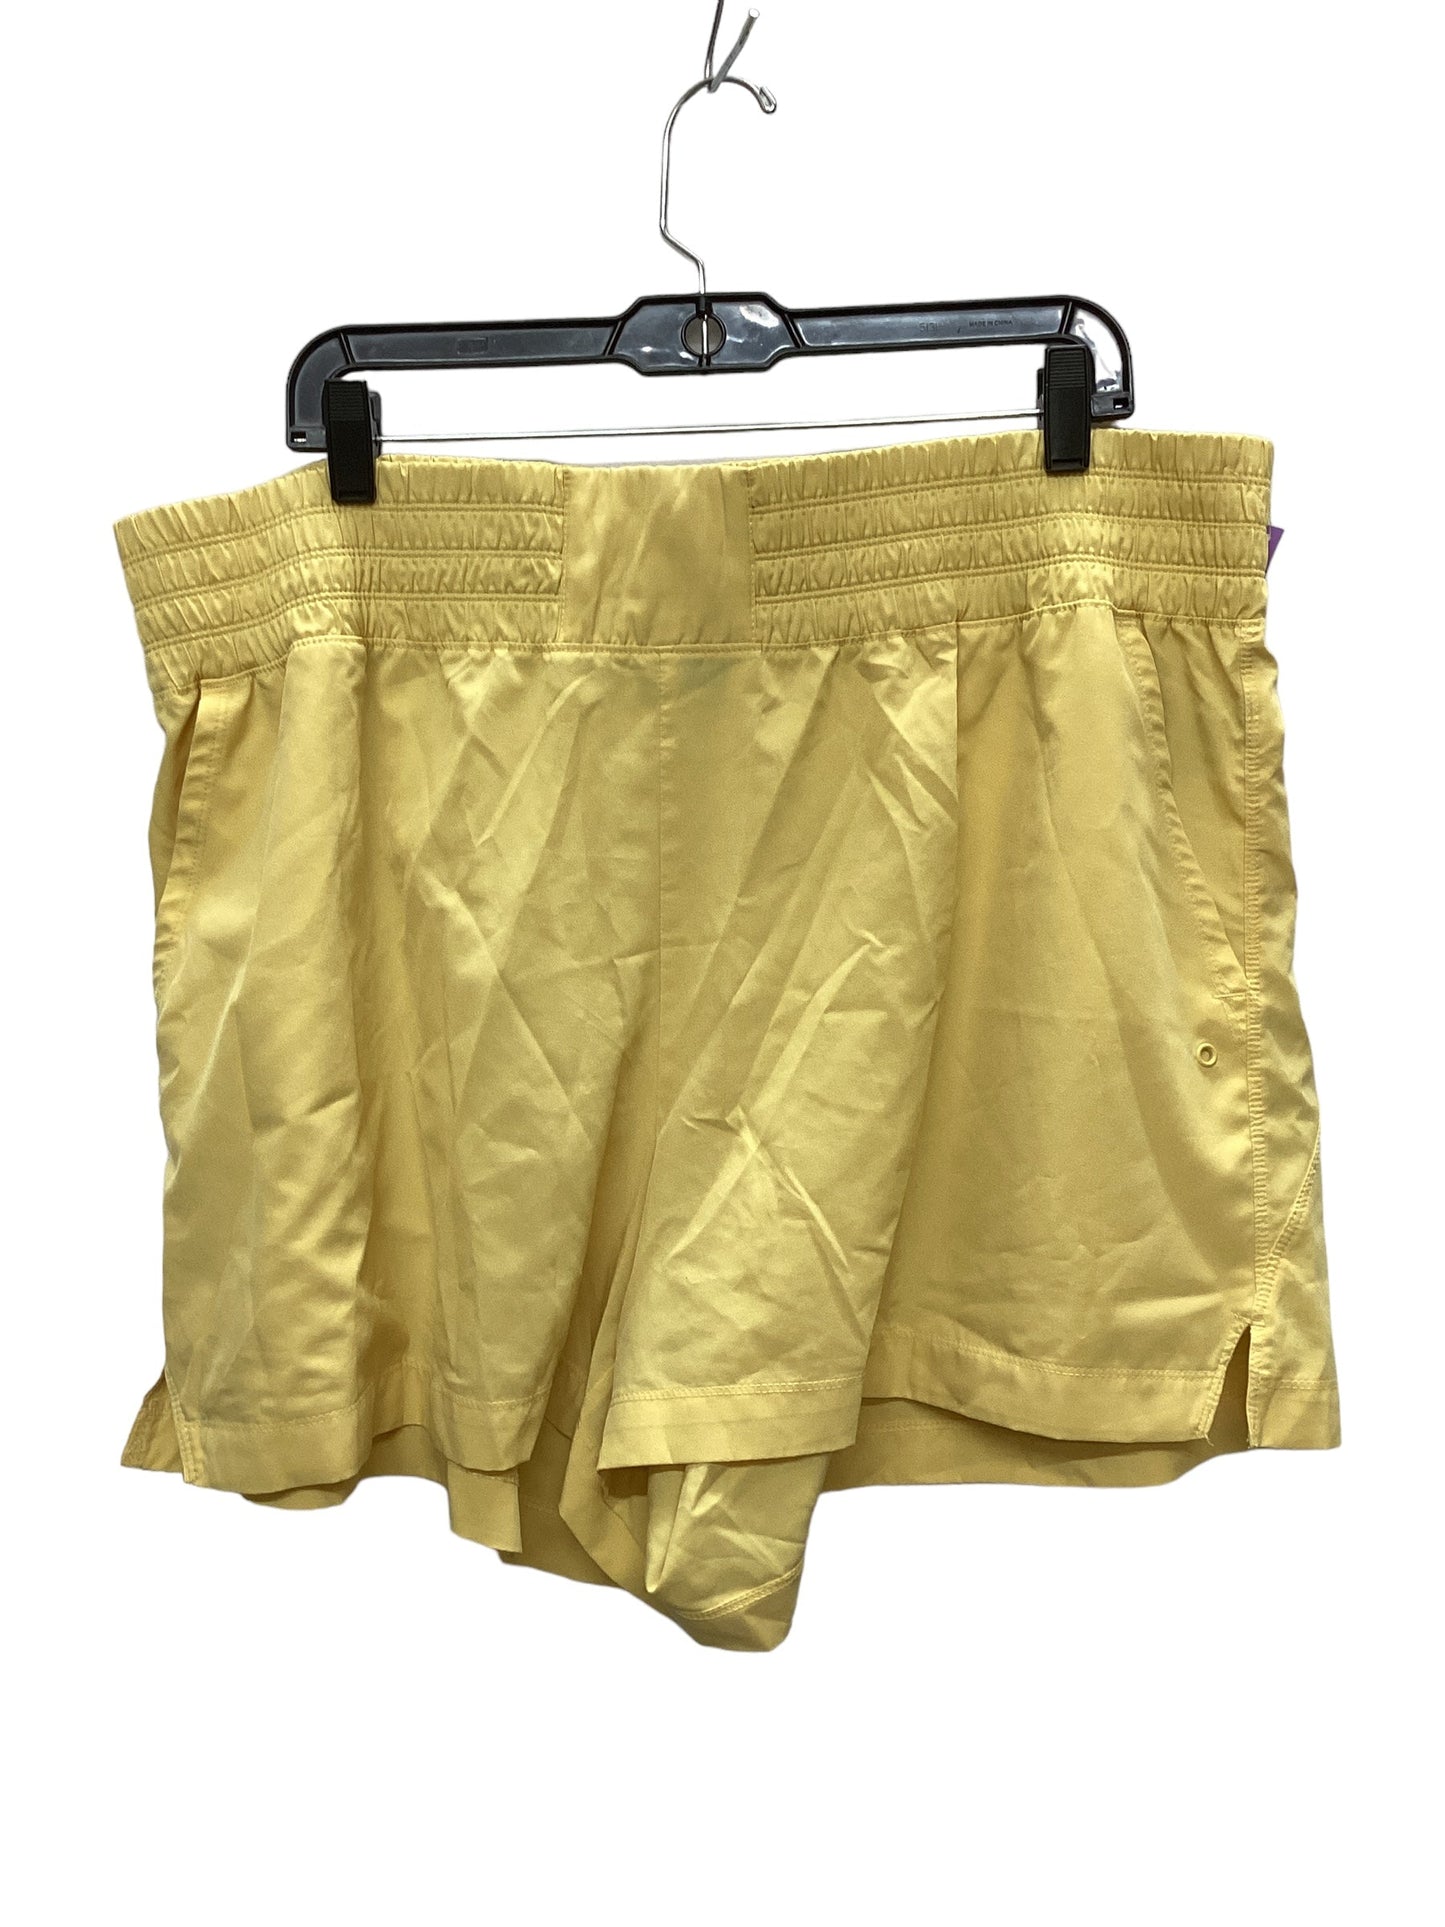 Yellow Athletic Shorts Old Navy, Size 2x